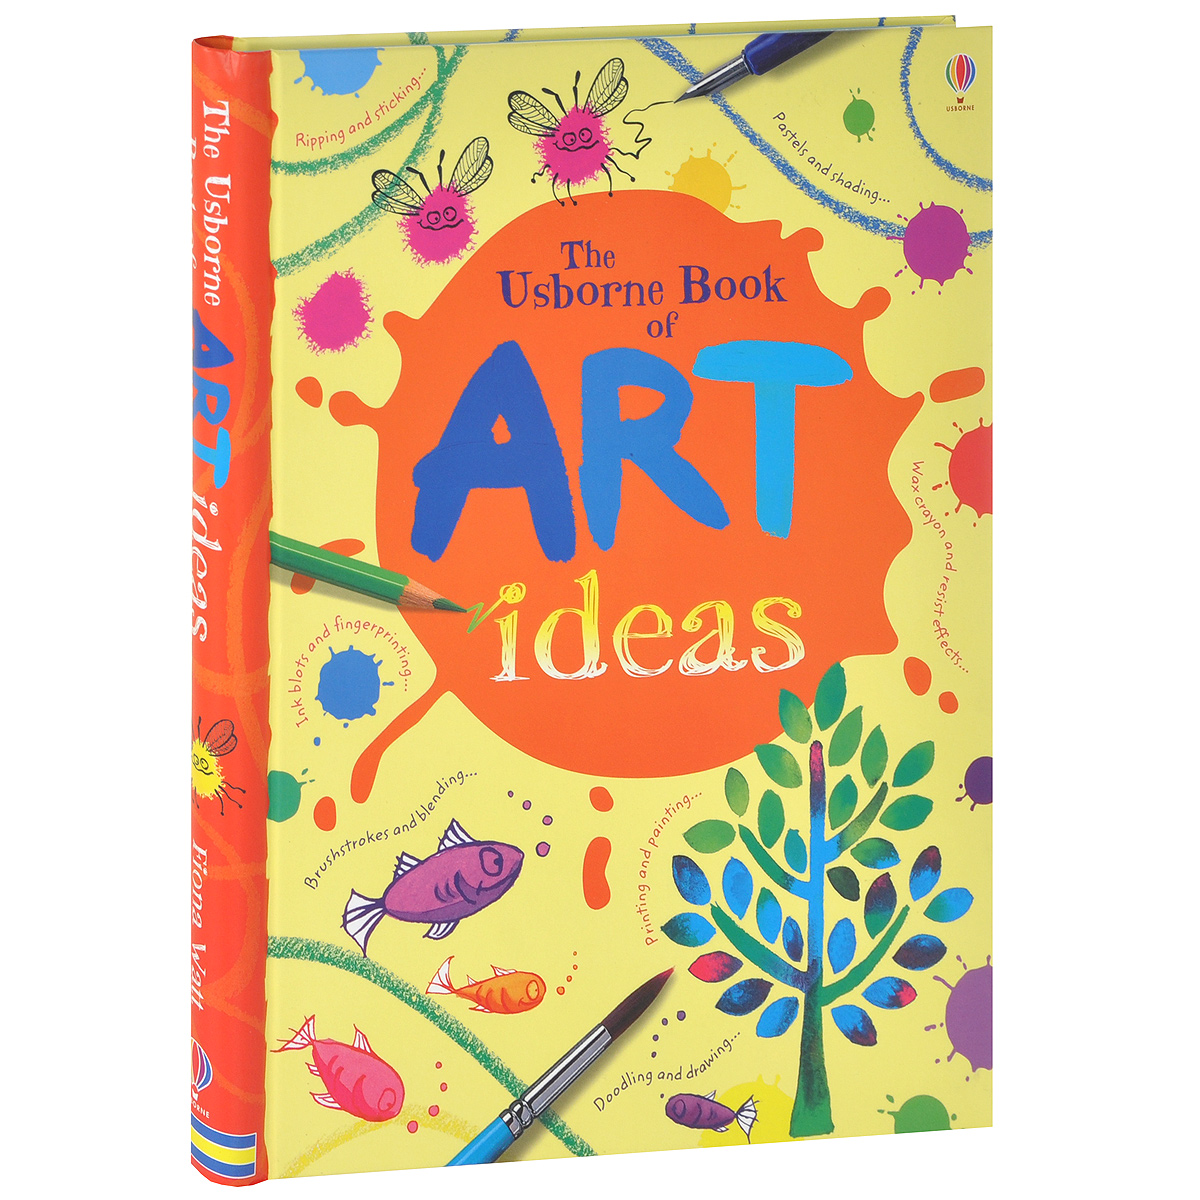 The Usborne Book of Art Ideas - Fiona Watt12296407An inspiring book with original ideas for creating stunning paintings and drawings using paints, pastels, inks, crayons and other media. Includes clear step-by-step explanations on how to use different types of paint and materials. With a concealed spiral binding so the book opens conveniently flat, and is an ideal gift for any would-be artist.